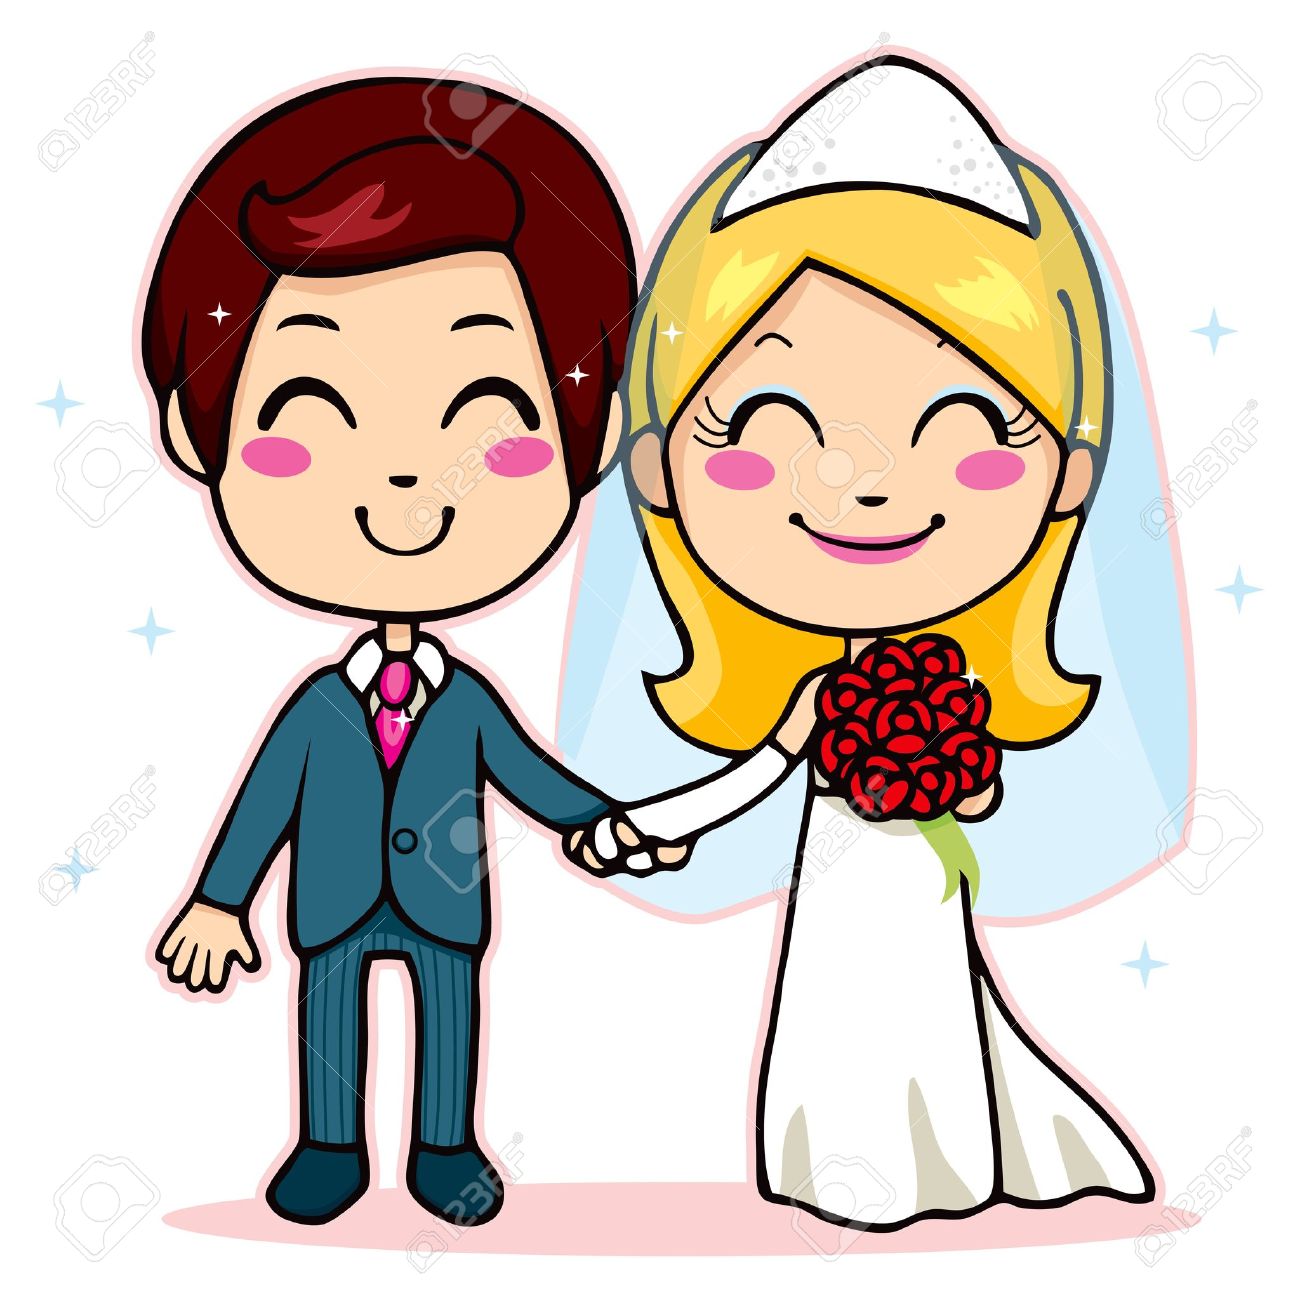 Image result for wedding clipart